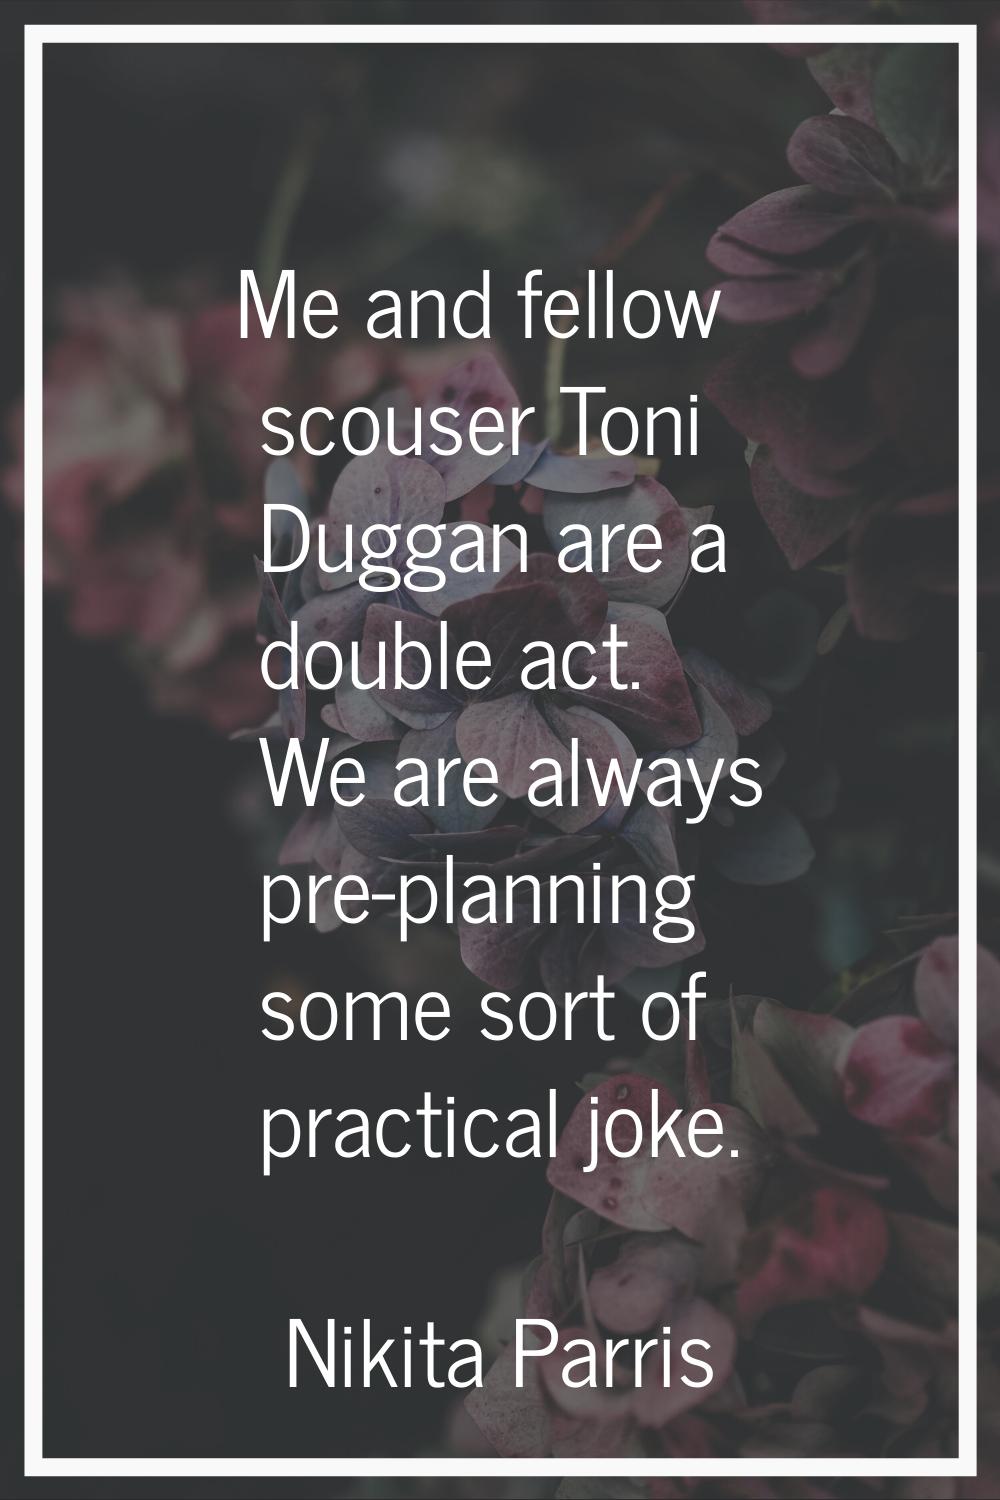 Me and fellow scouser Toni Duggan are a double act. We are always pre-planning some sort of practic